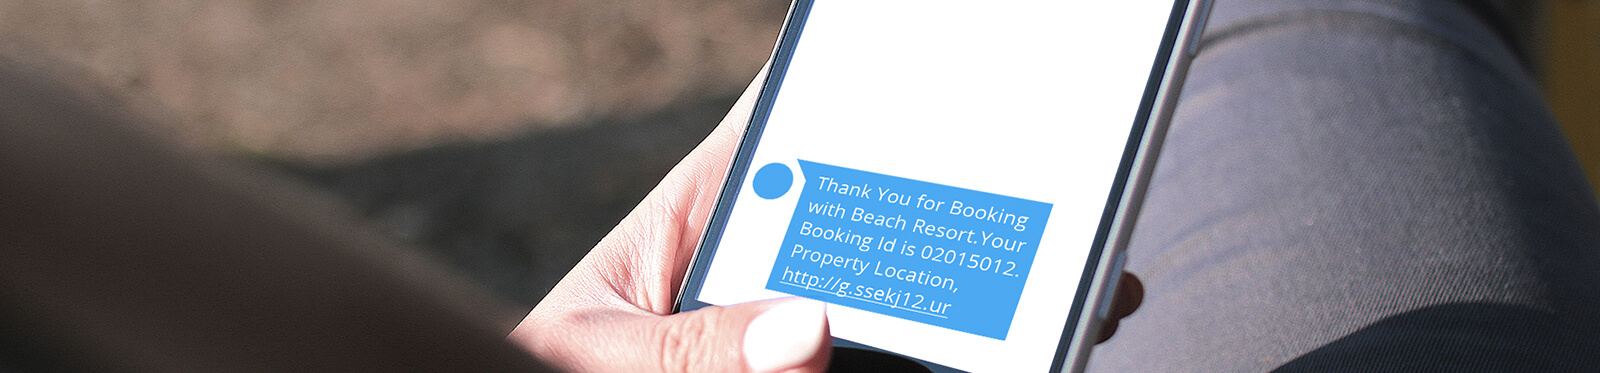 SMS on booking